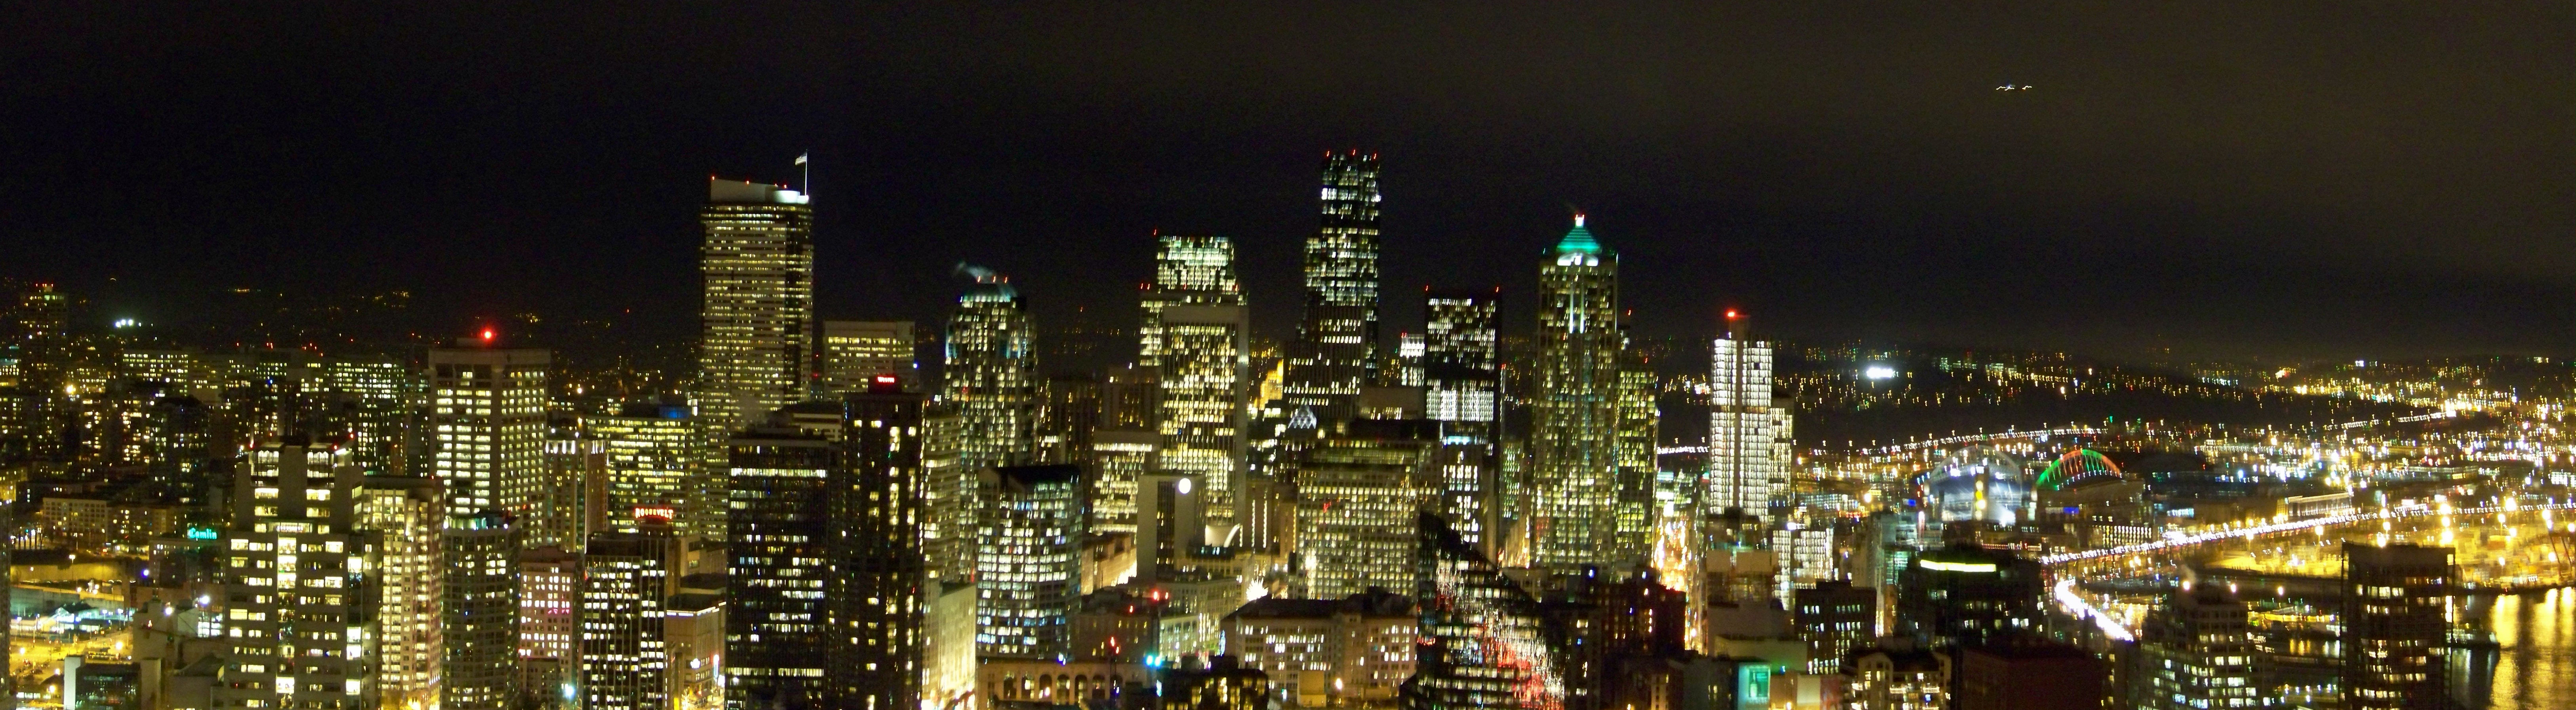 File:Downtown Seattle at night.jpg - Wikimedia Commons